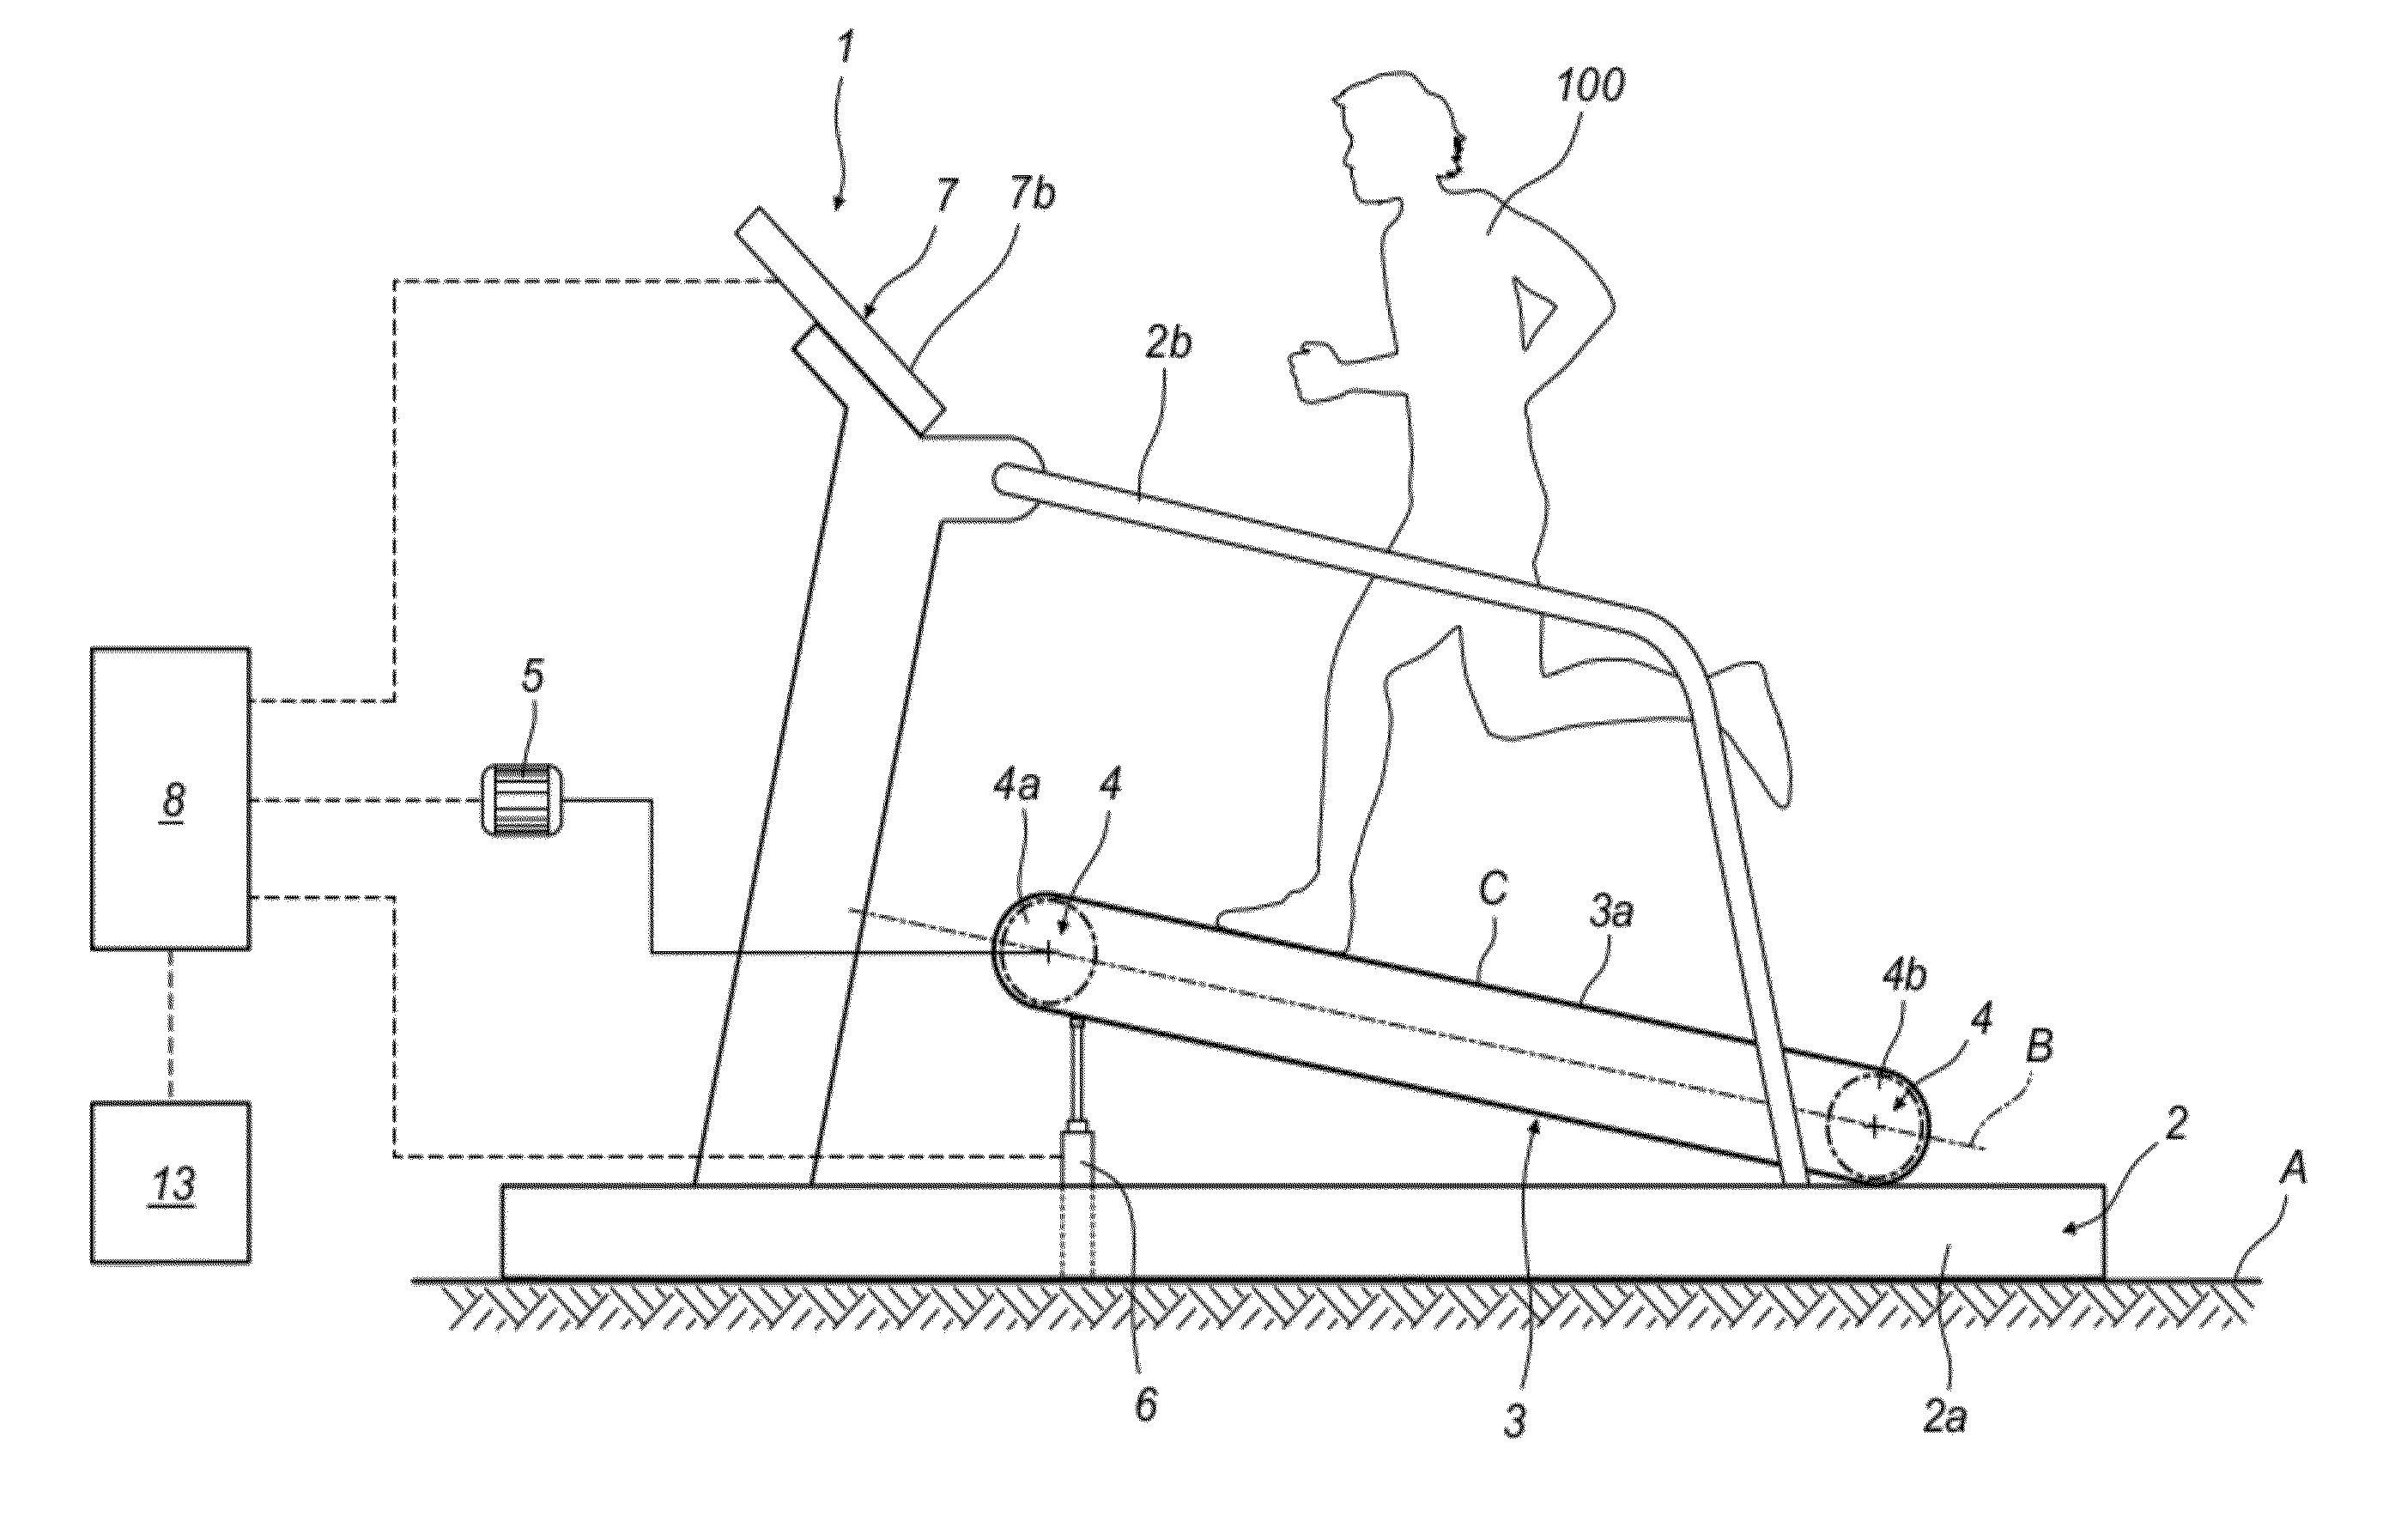 Exercise machine and method for performing an exercise